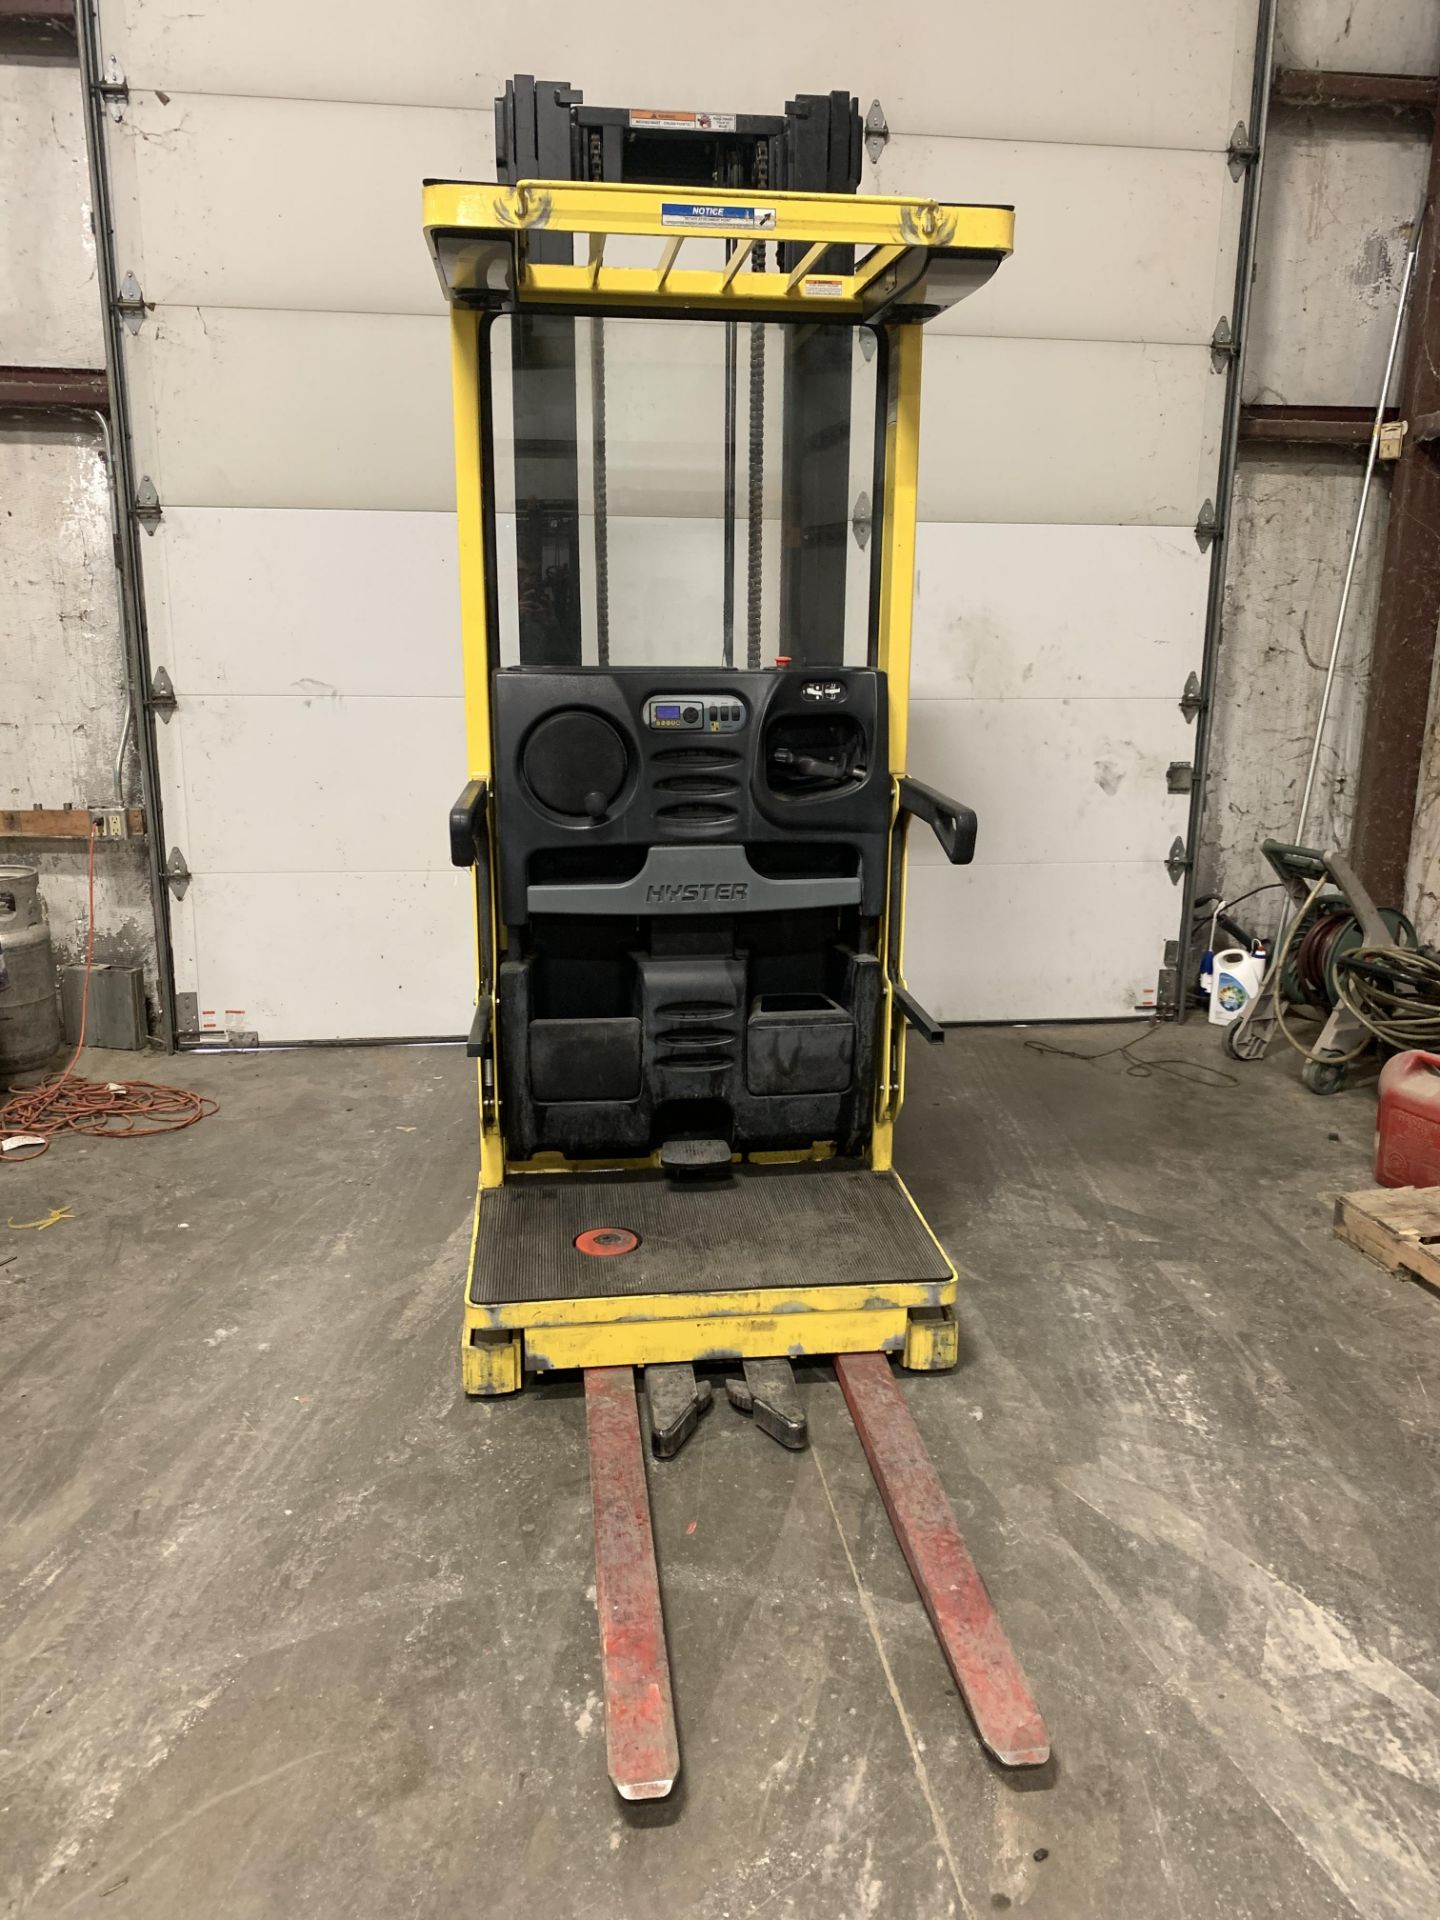 *LOCATED HAMILTON, OH* 2016 HYSTER 3,000-LB. CAP ORDER PICKER, MODEL: R30XM3, 36V, 240" LIFT HEIGHT - Image 3 of 4